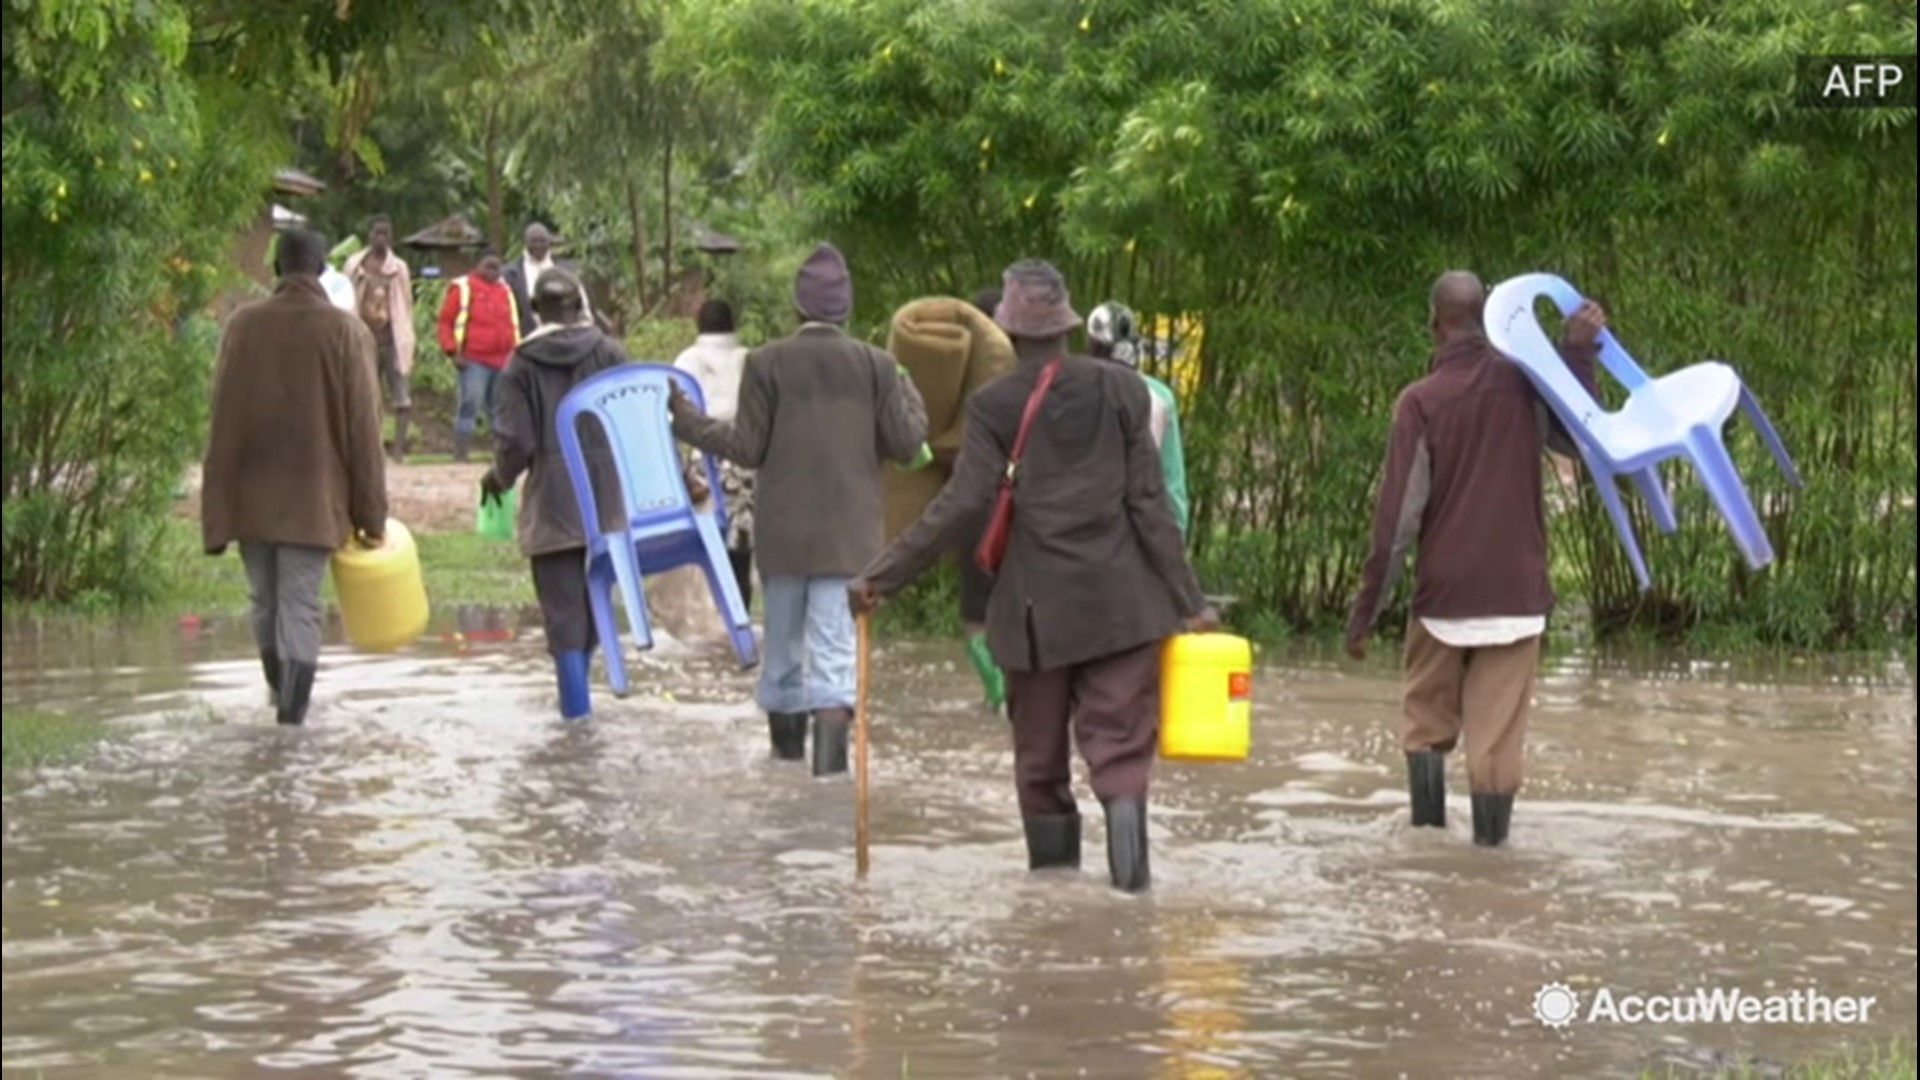 Around 200 homes in the Kenyan village of Nyando were displaced after being devastated by heavy rainfall and flooding on Dec. 4.